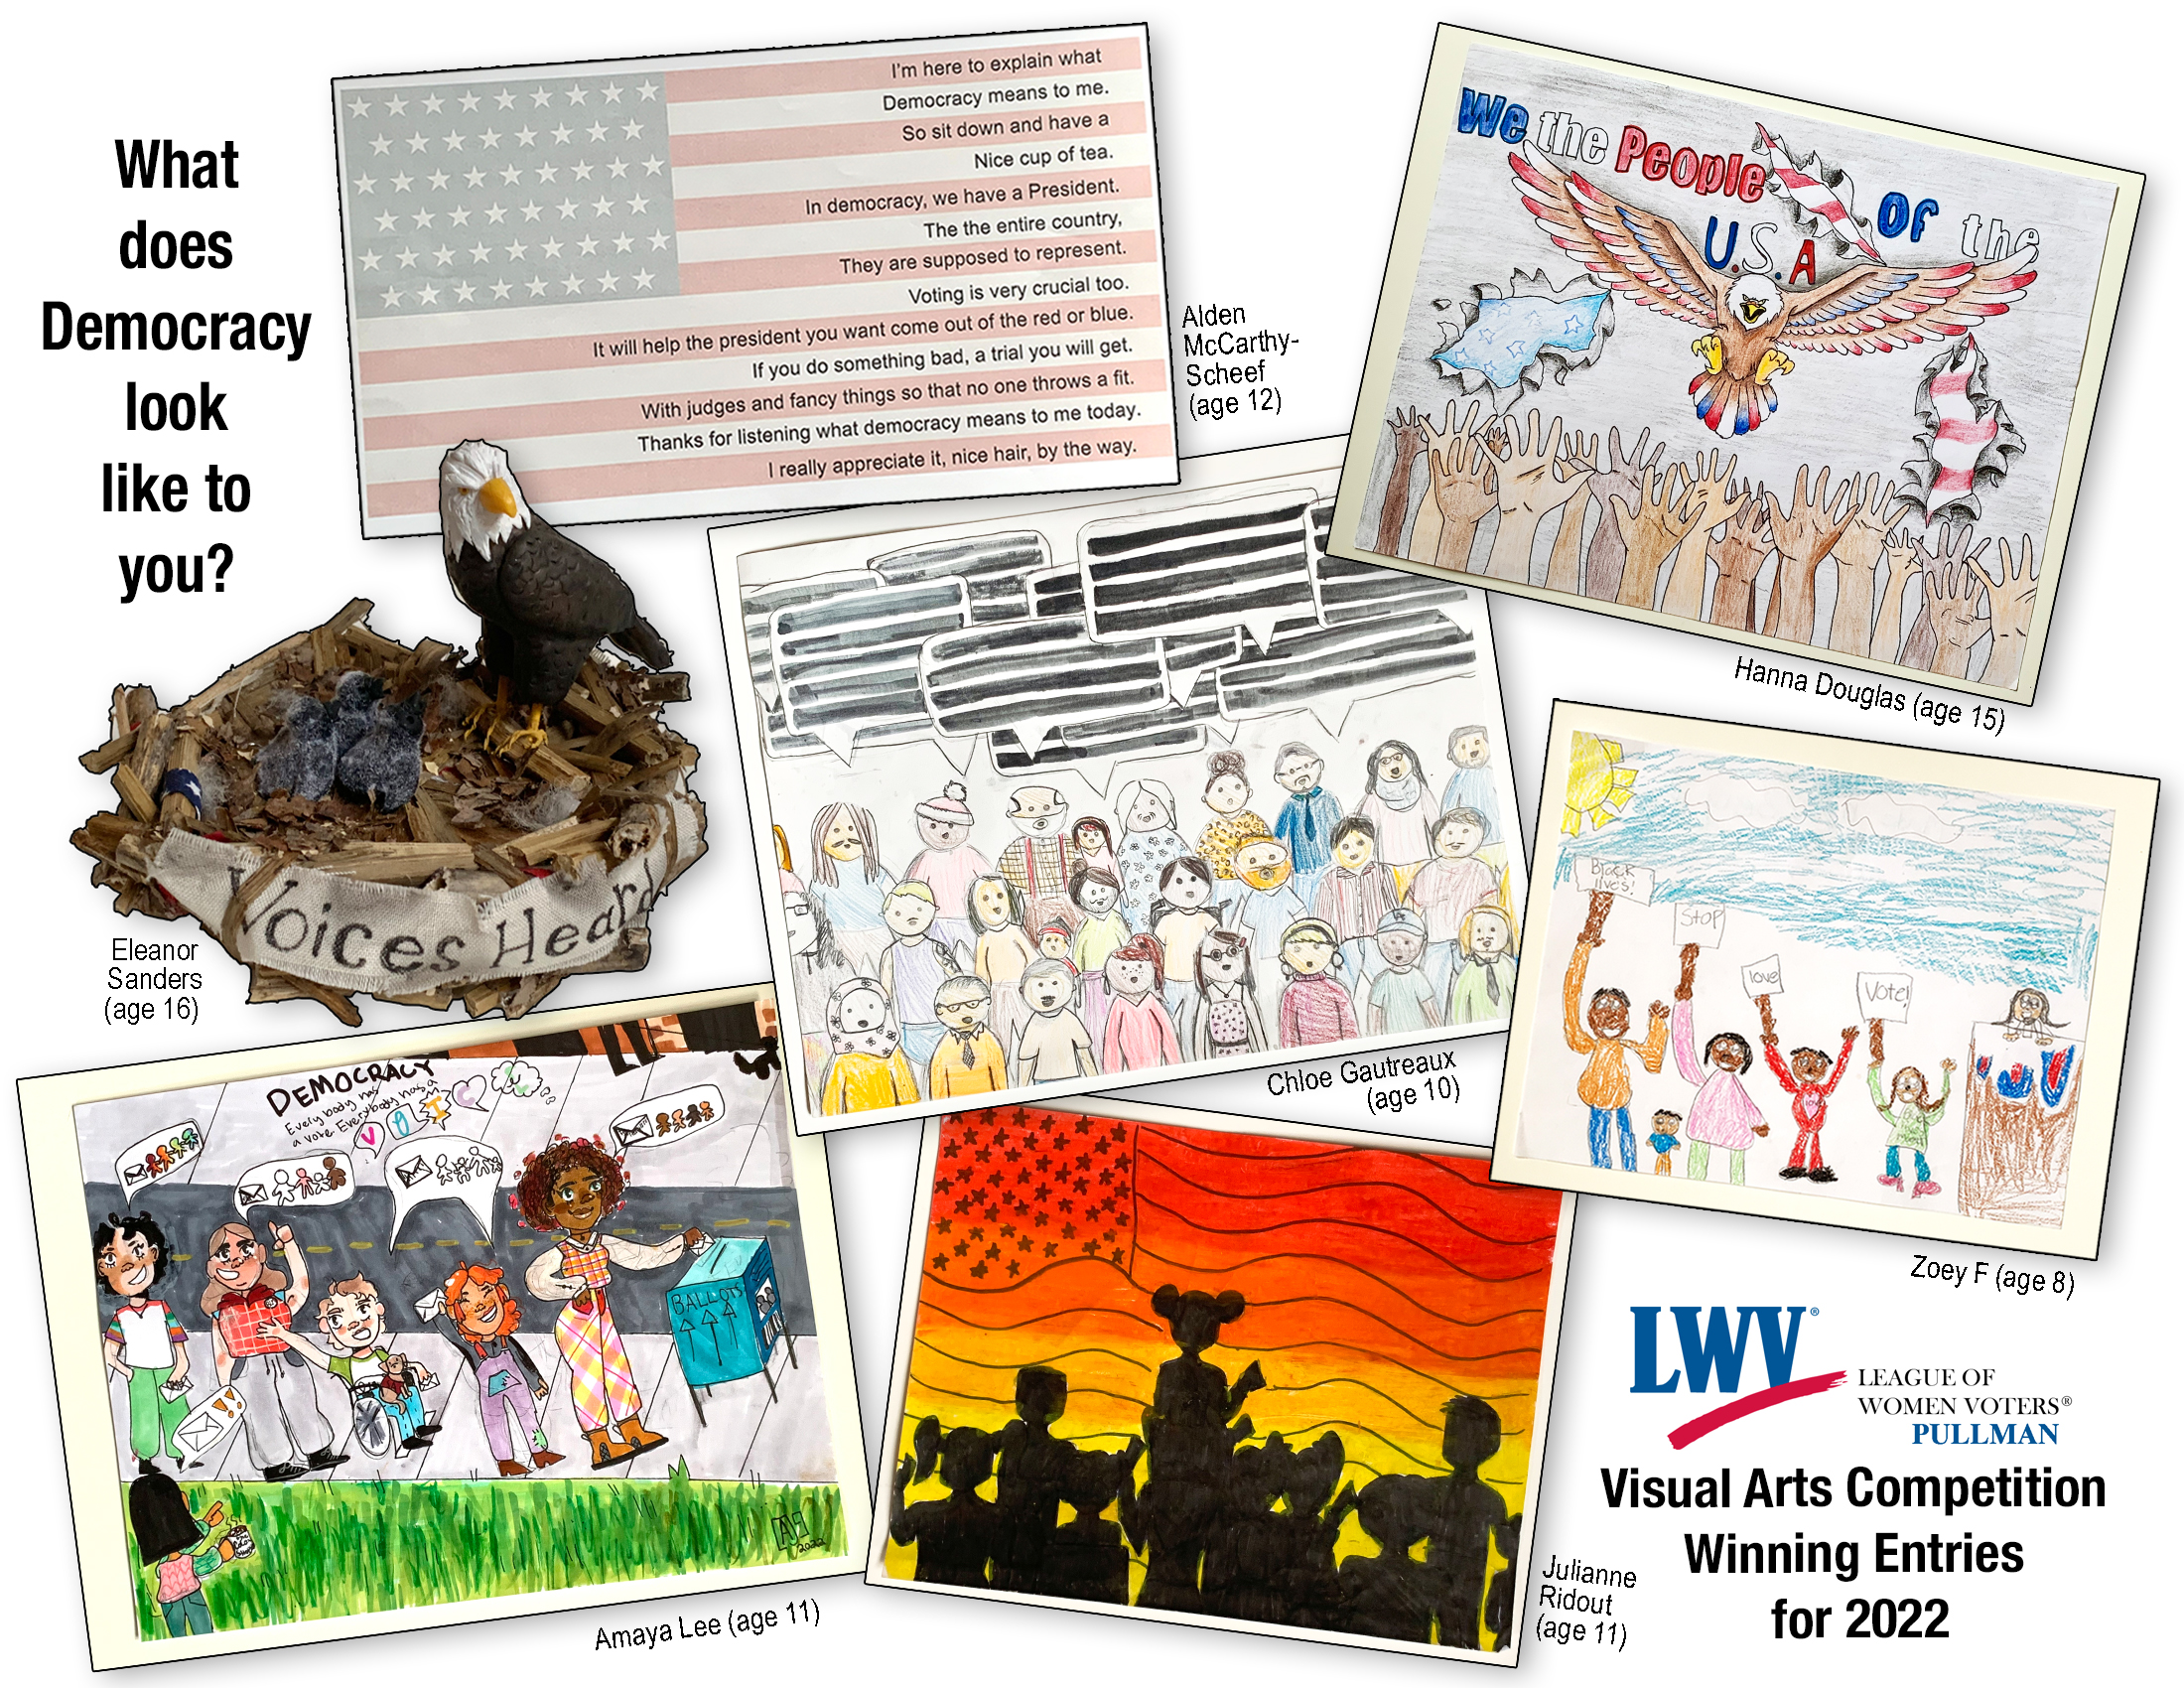 A collage of the visual arts competition’s 7 winning entires for the theme of What does democracy look like to you. Artwork includes a flag with a poem, eagle in a nest, eagle flying over people raised hands, people holding signs, people lined up at ballot box, silhouette of people with a sunset flag background, people with word bubbles overhead.